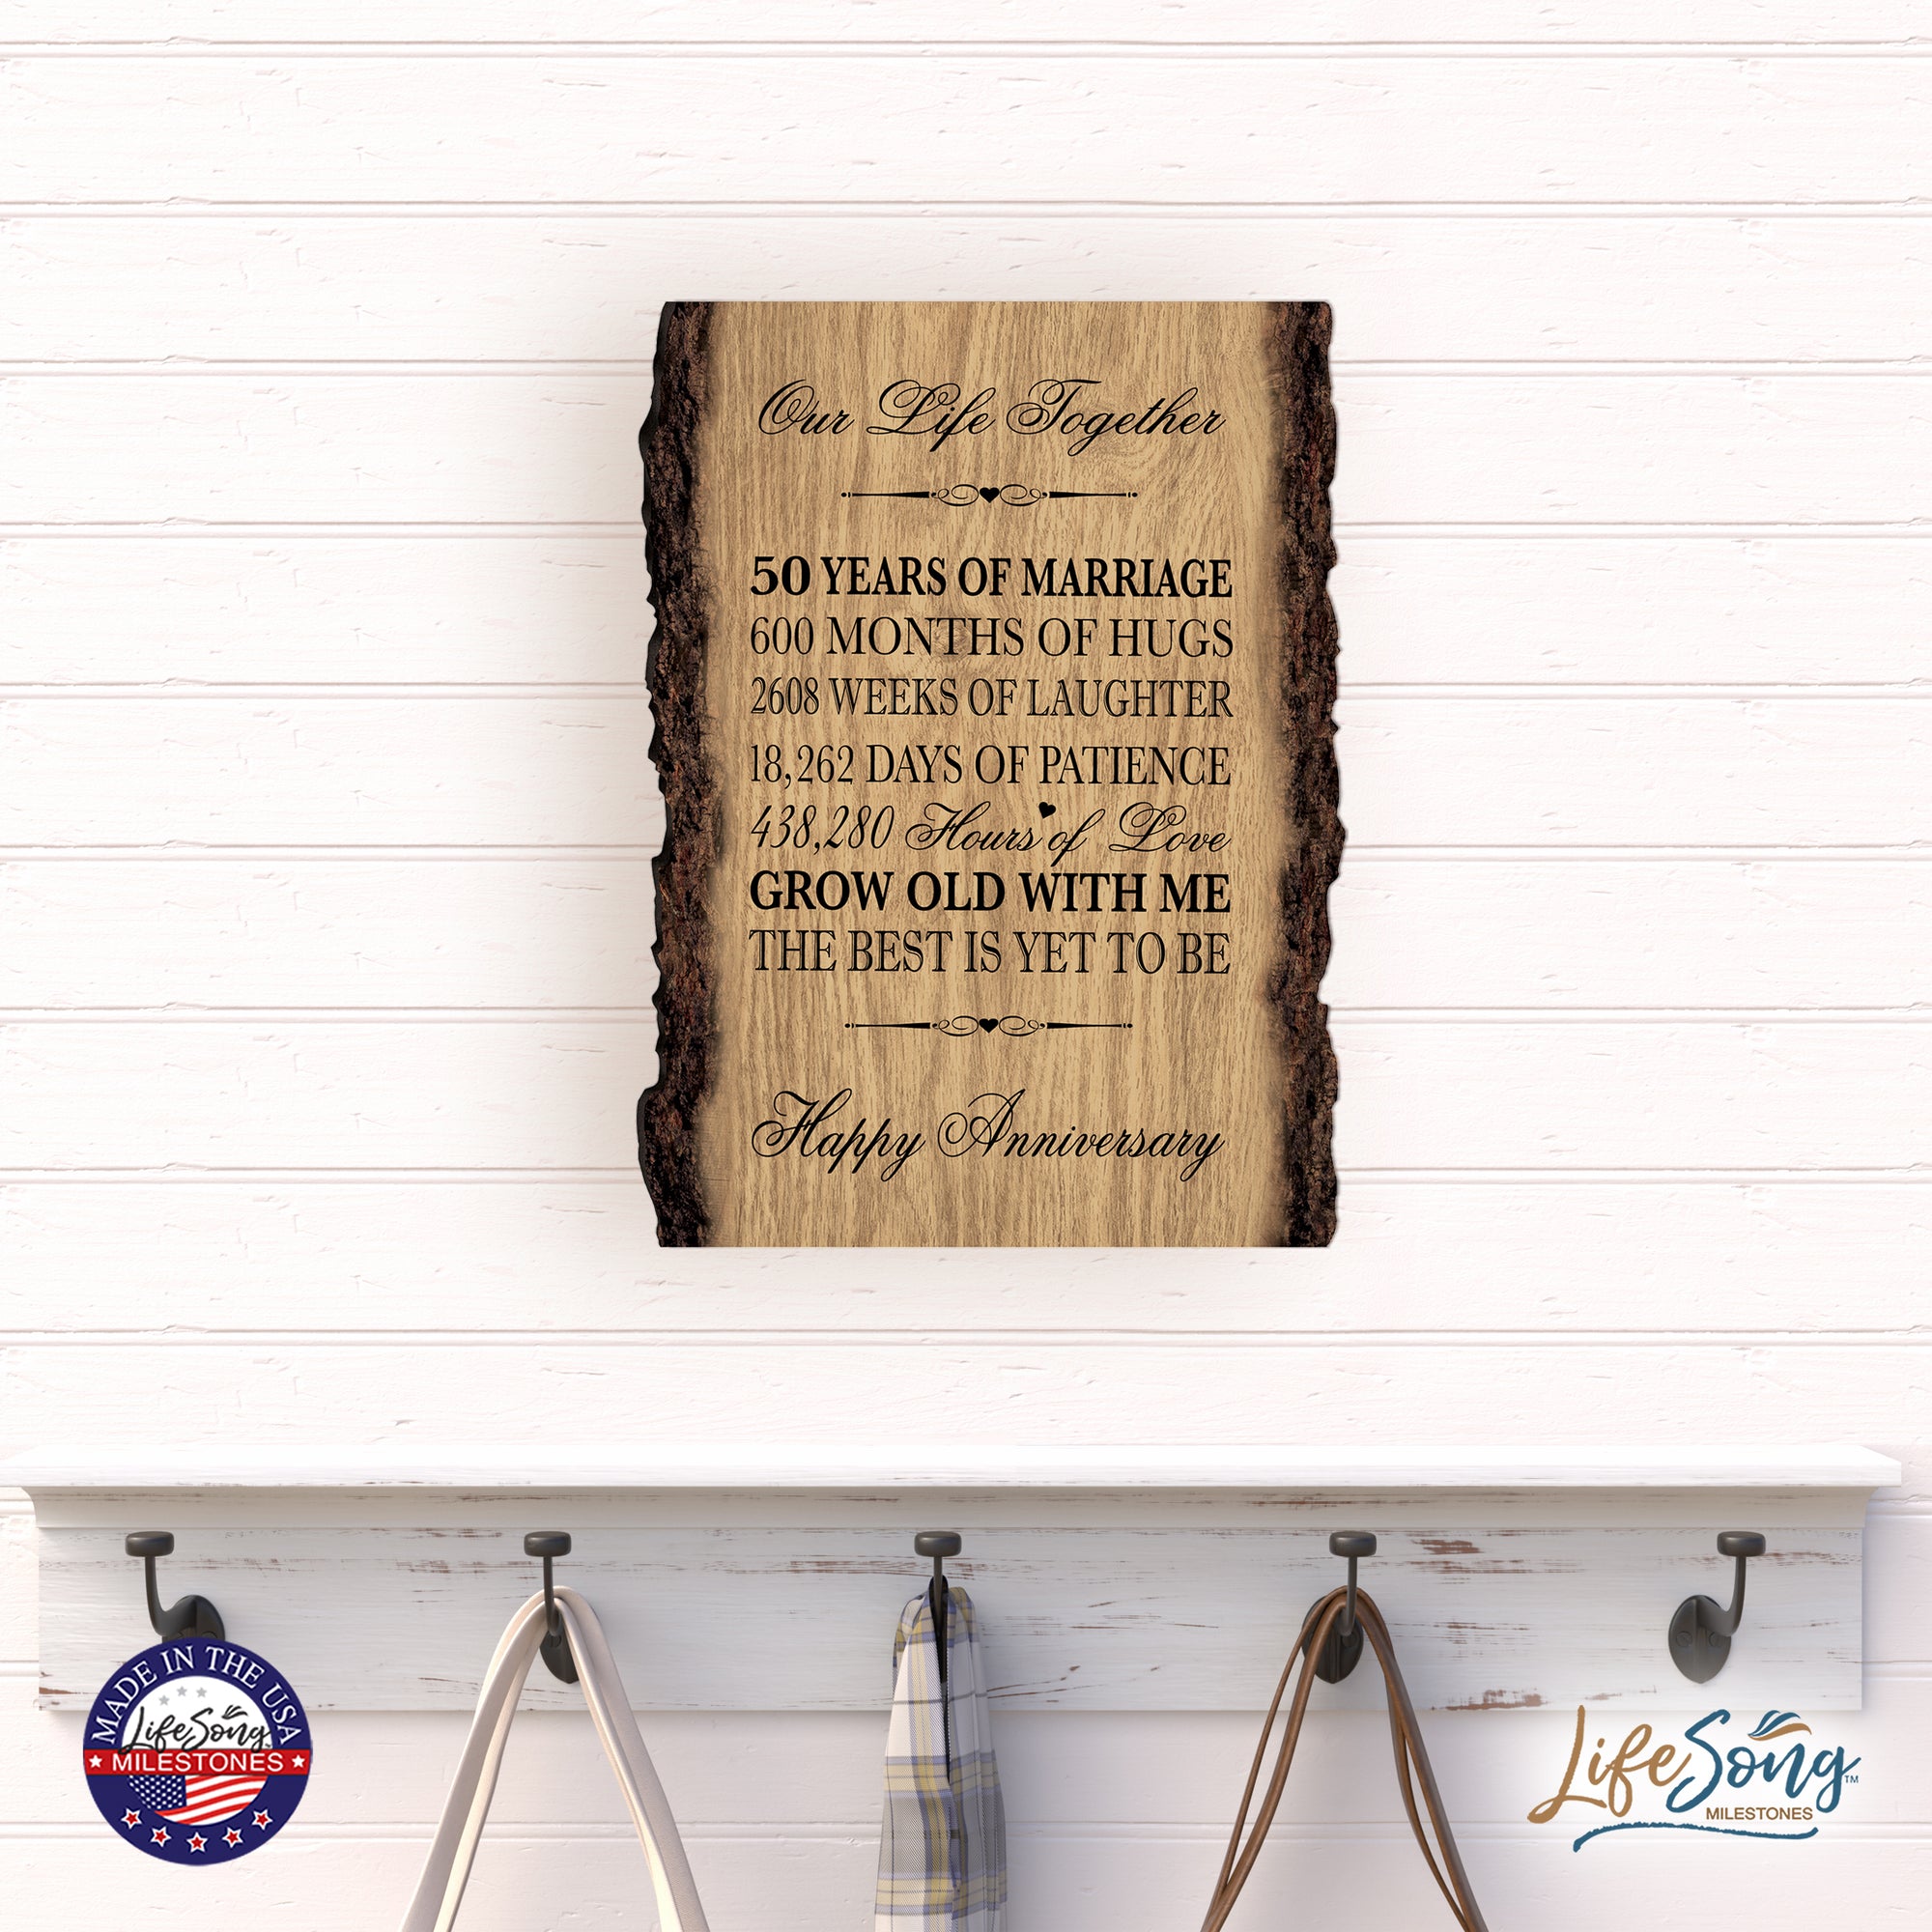 Rustic Wedding Anniversary 9x12 Barky Wall Plaque Gift For Parents, Grandparents New Couple - 50 Years Of Marriage